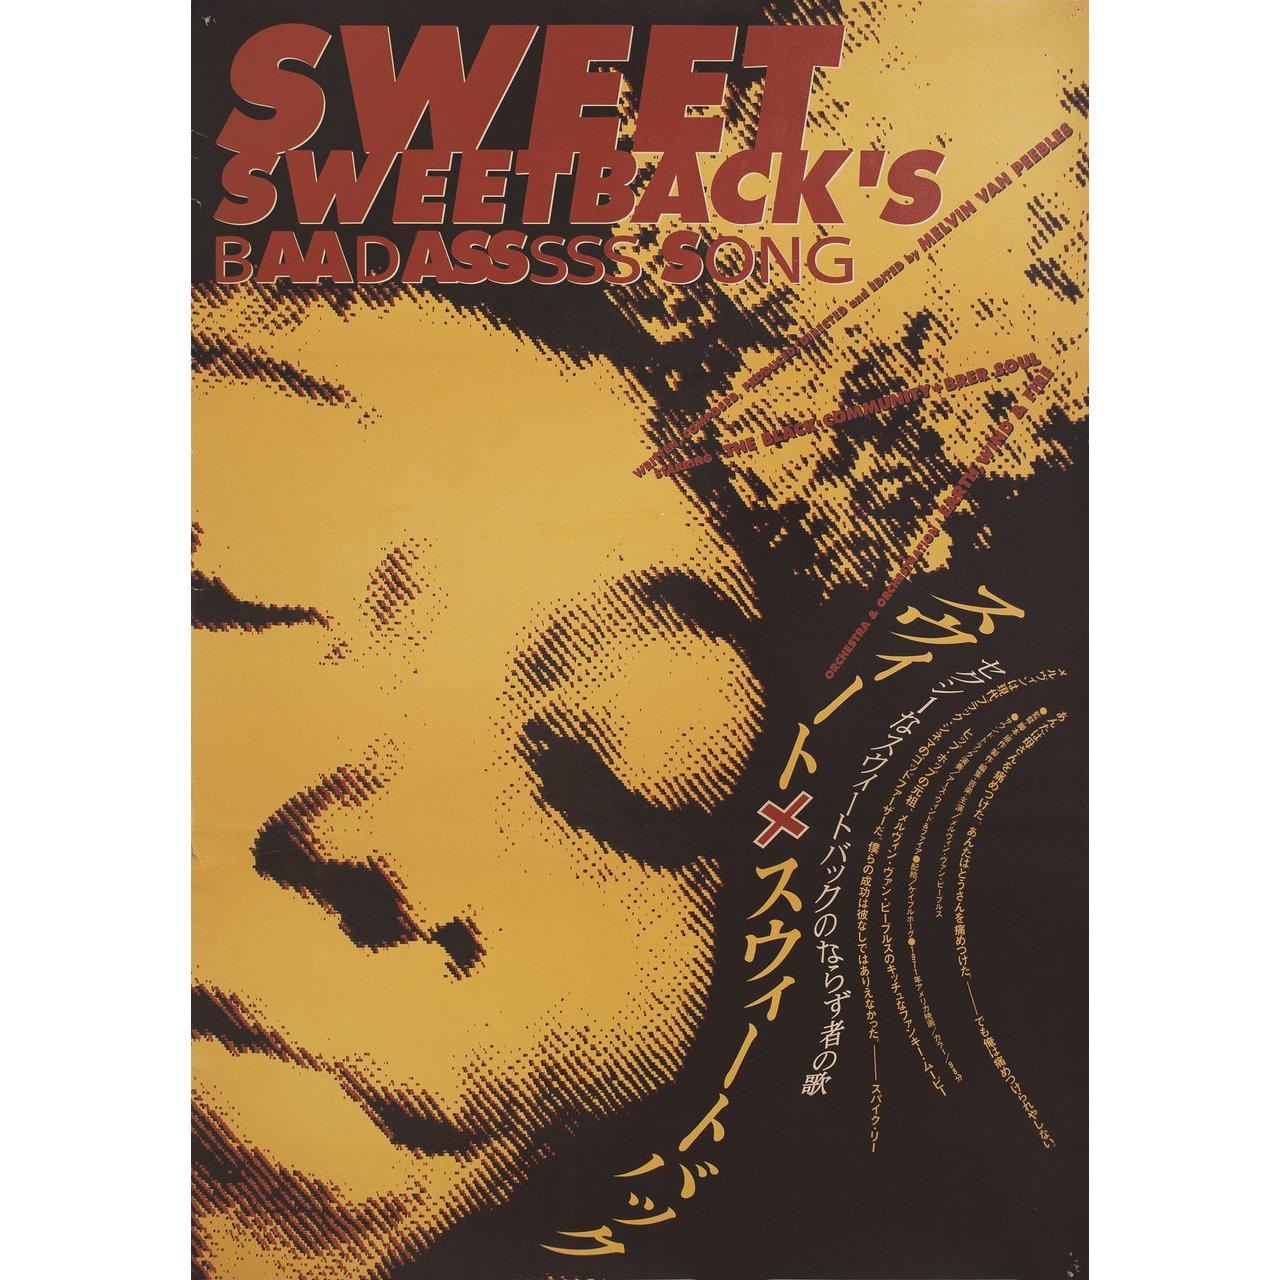 Original 1993 Japanese B2 poster for the first Japanese theatrical release of the 1971 film Sweet Sweetback's Baadasssss Song directed by Melvin Van Peebles with Simon Chuckster / Melvin Van Peebles / Hubert Scales / John Dullaghan. Very Good-Fine